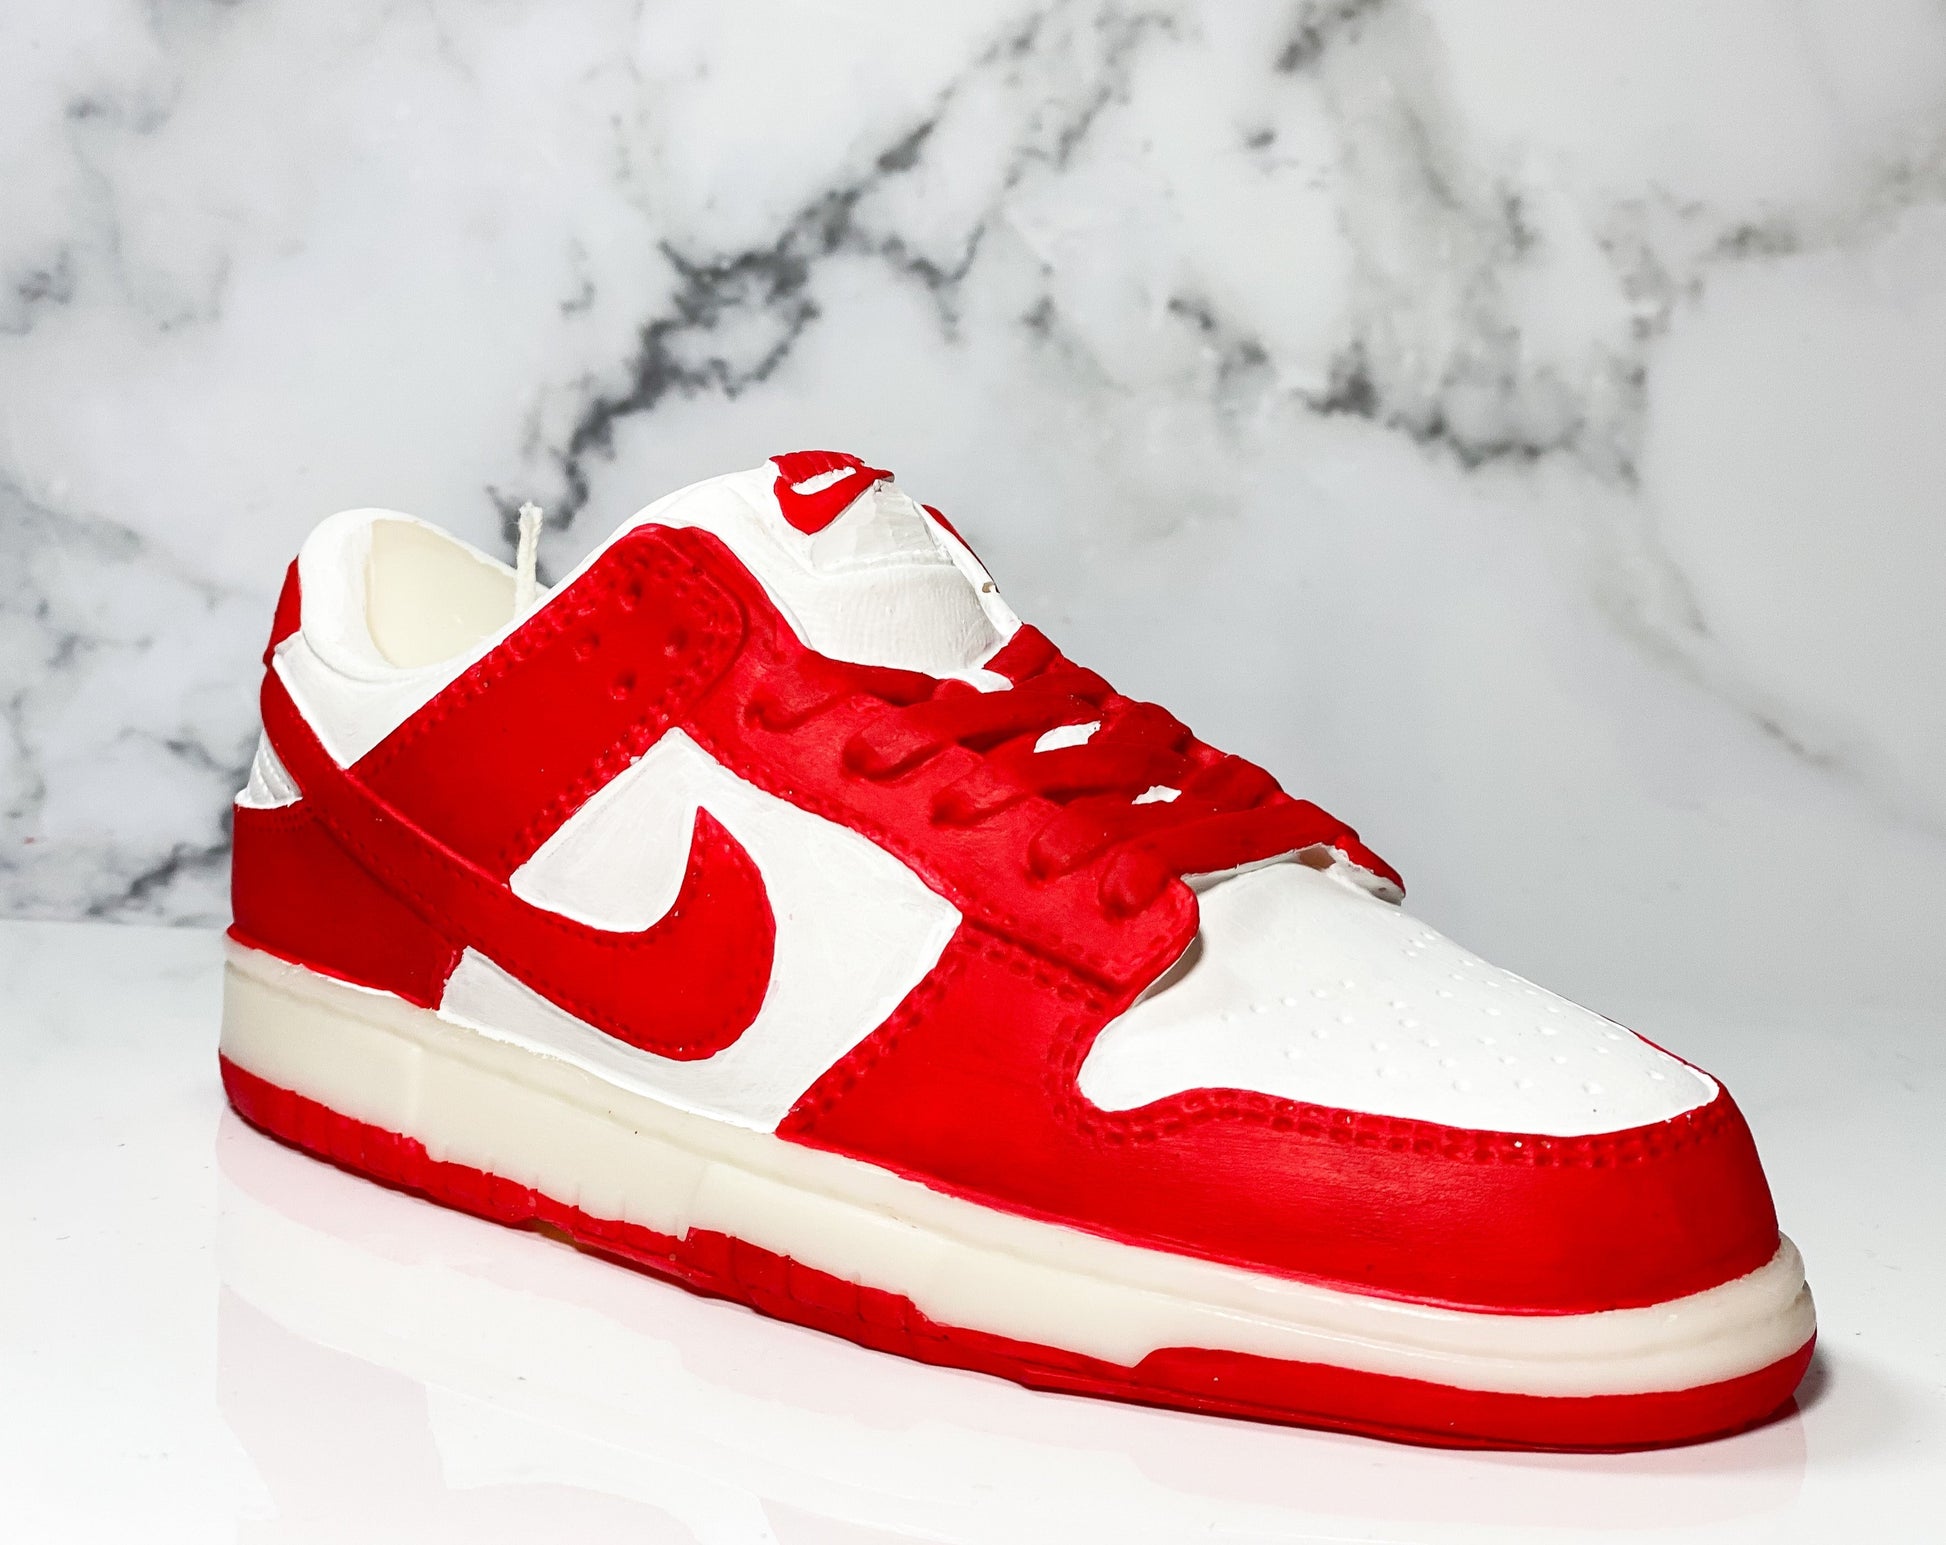 Nike Dunk Low University Red Inspired Sneaker Candle.